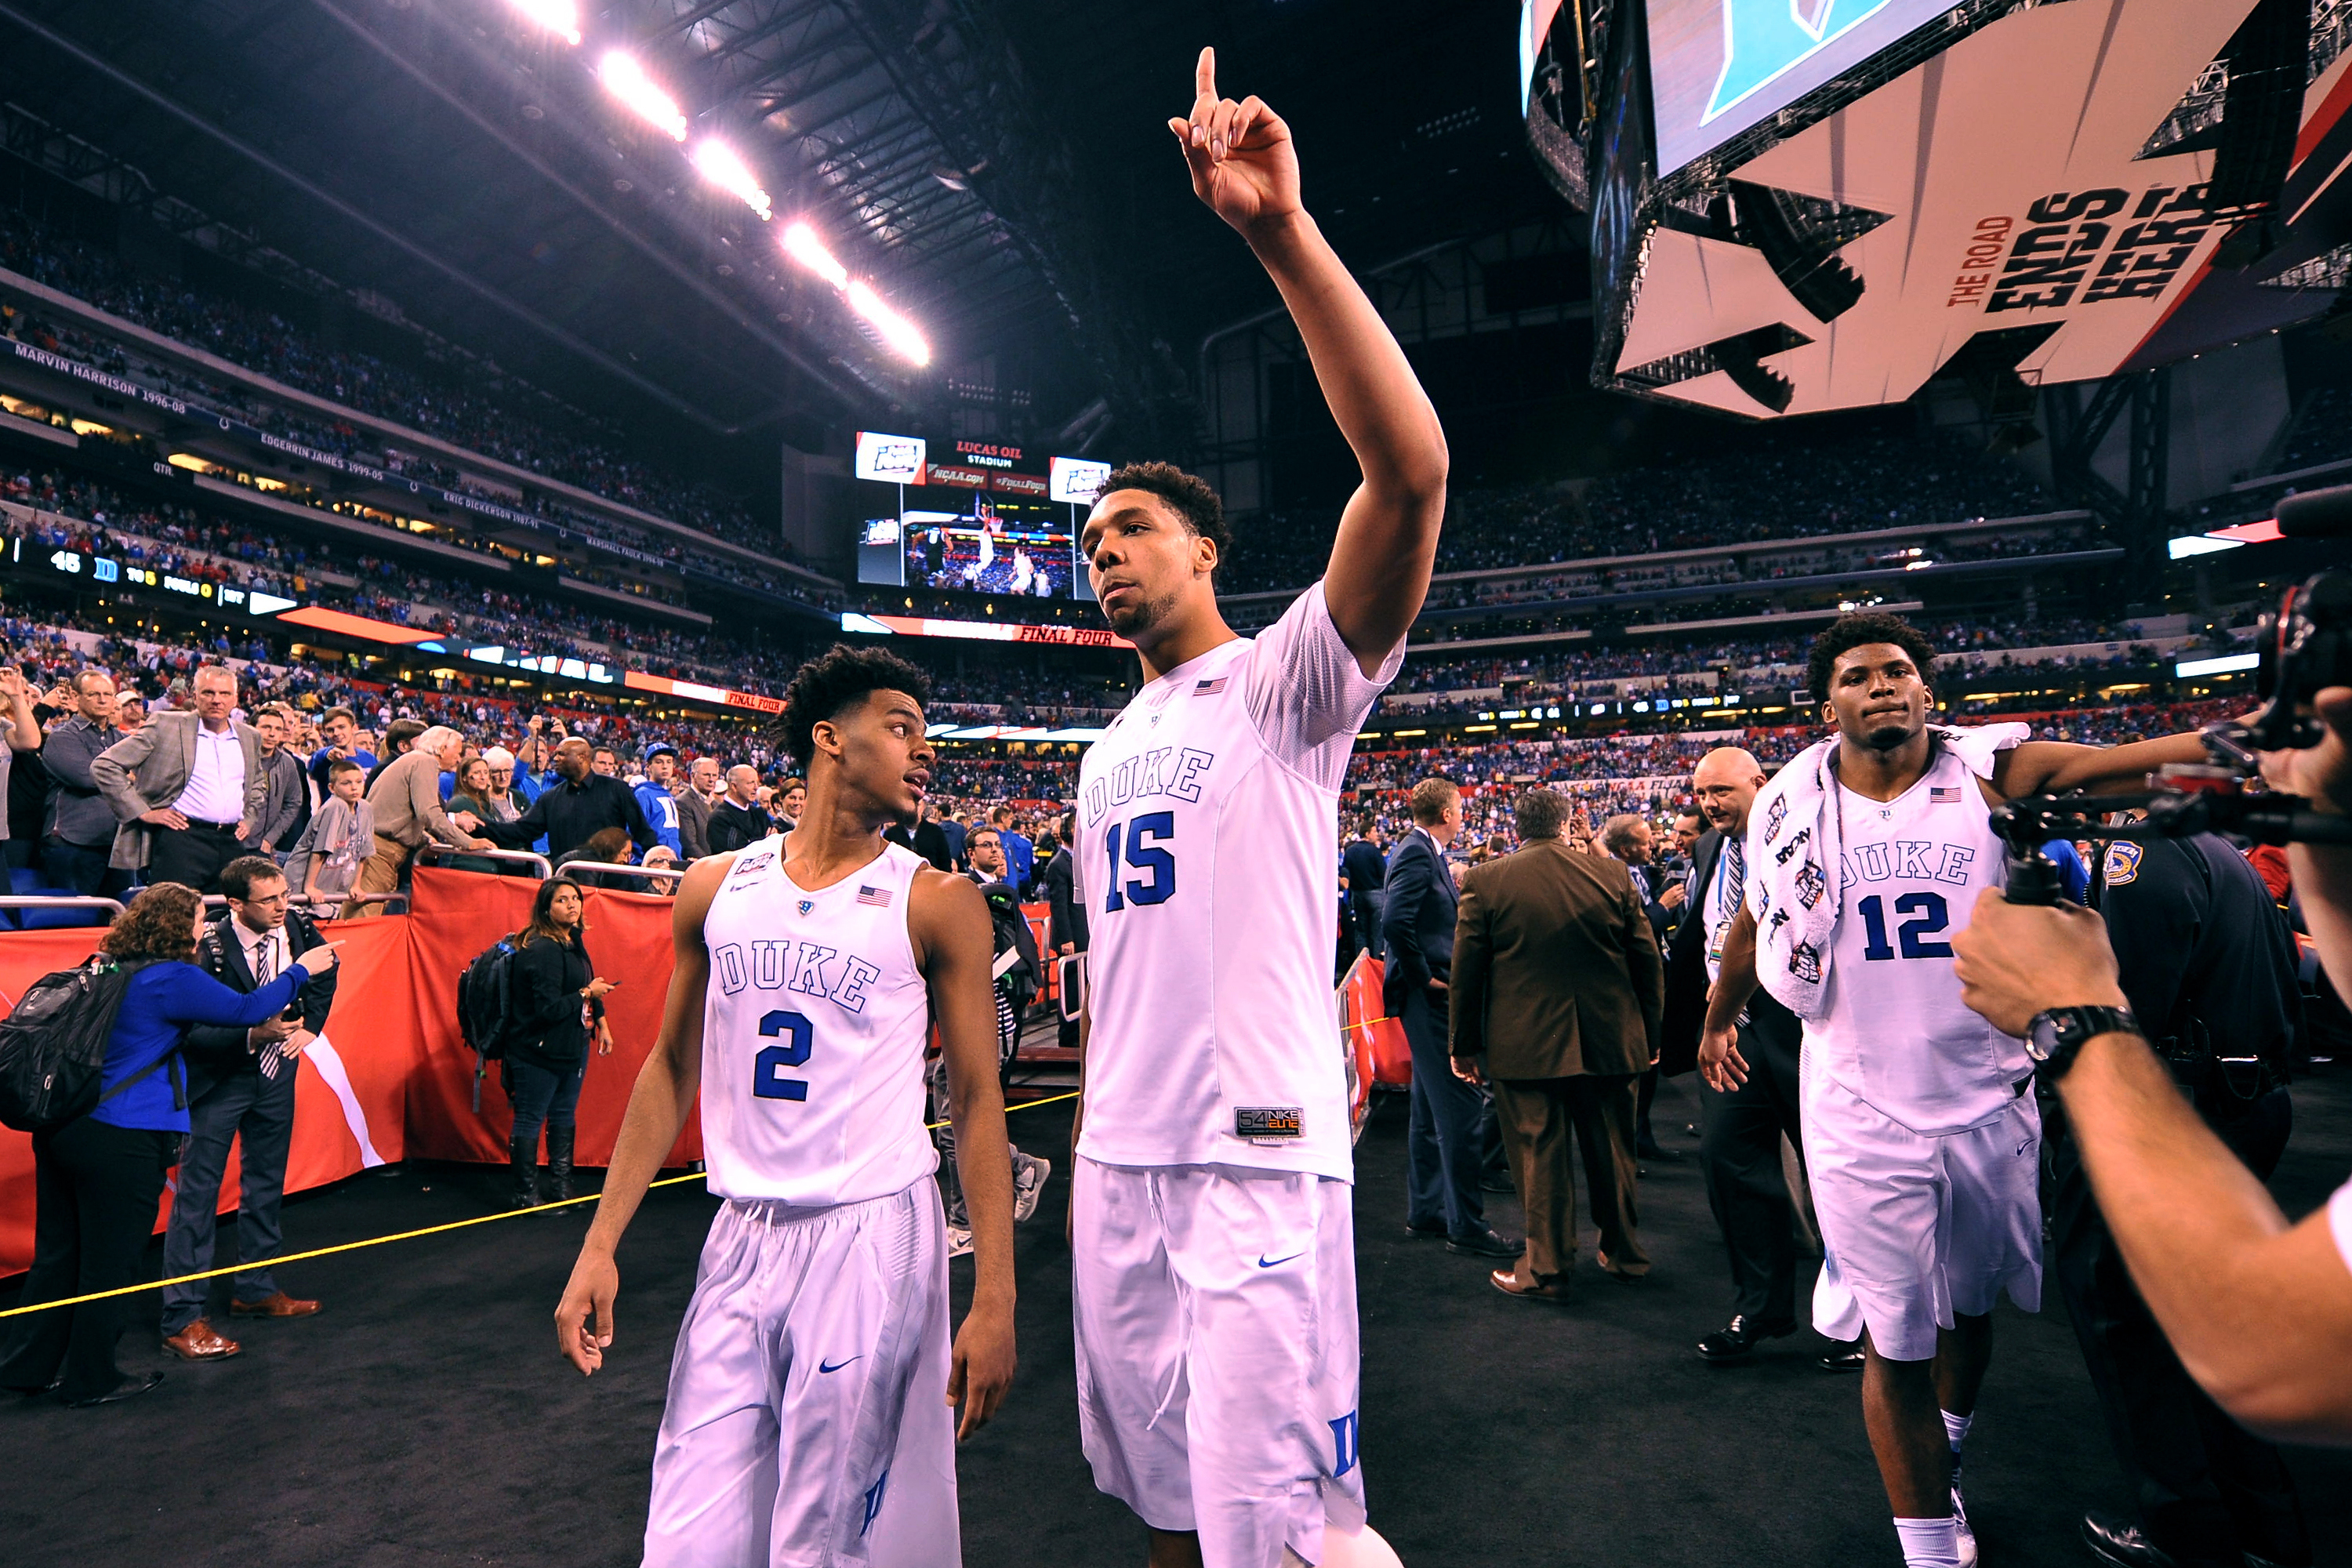 Quinn Cook #2, Jahlil Okafor #15 and Justise Winslow #12 of the Duke Blue Devils acknowledge fans while walking off the court following their 81-61 win against the Michigan State Spartans during the NCAA Men's Final Four Semifinal at Lucas Oil Stadium on April 4, 2015 in Indianapolis, Indiana.